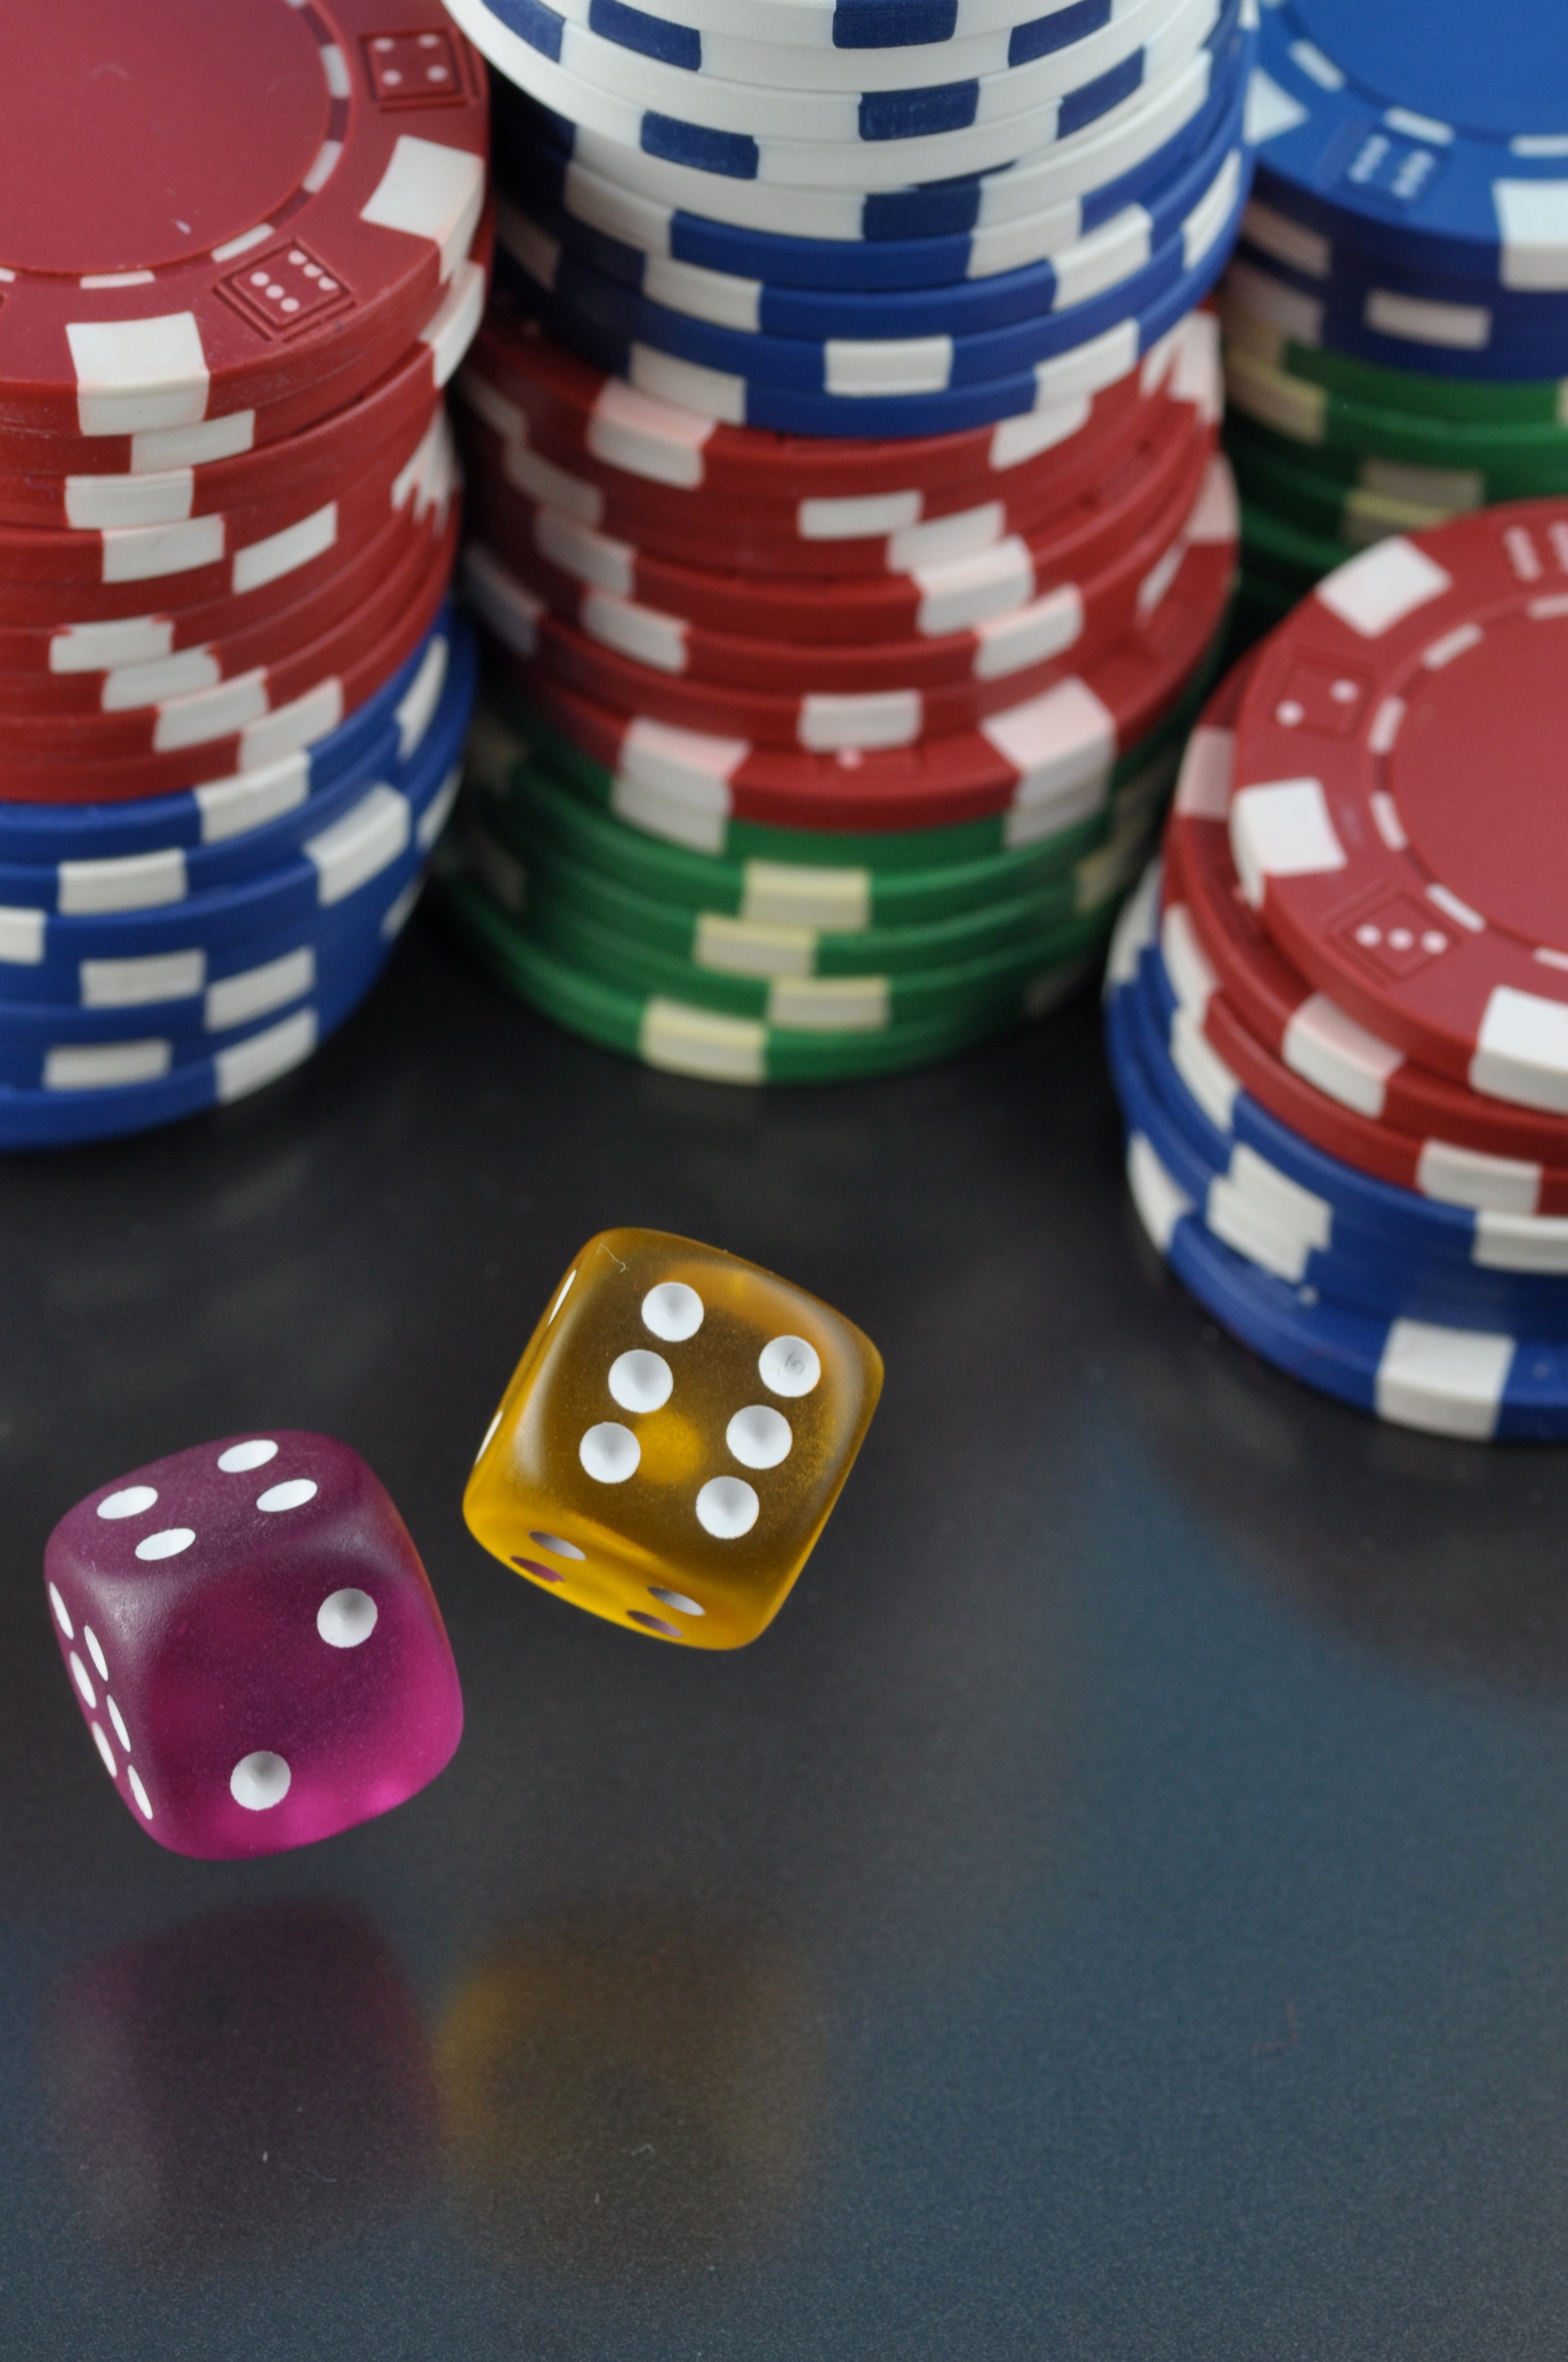 Changing Dynamics: The Integration of Technology in the Gambling Industry